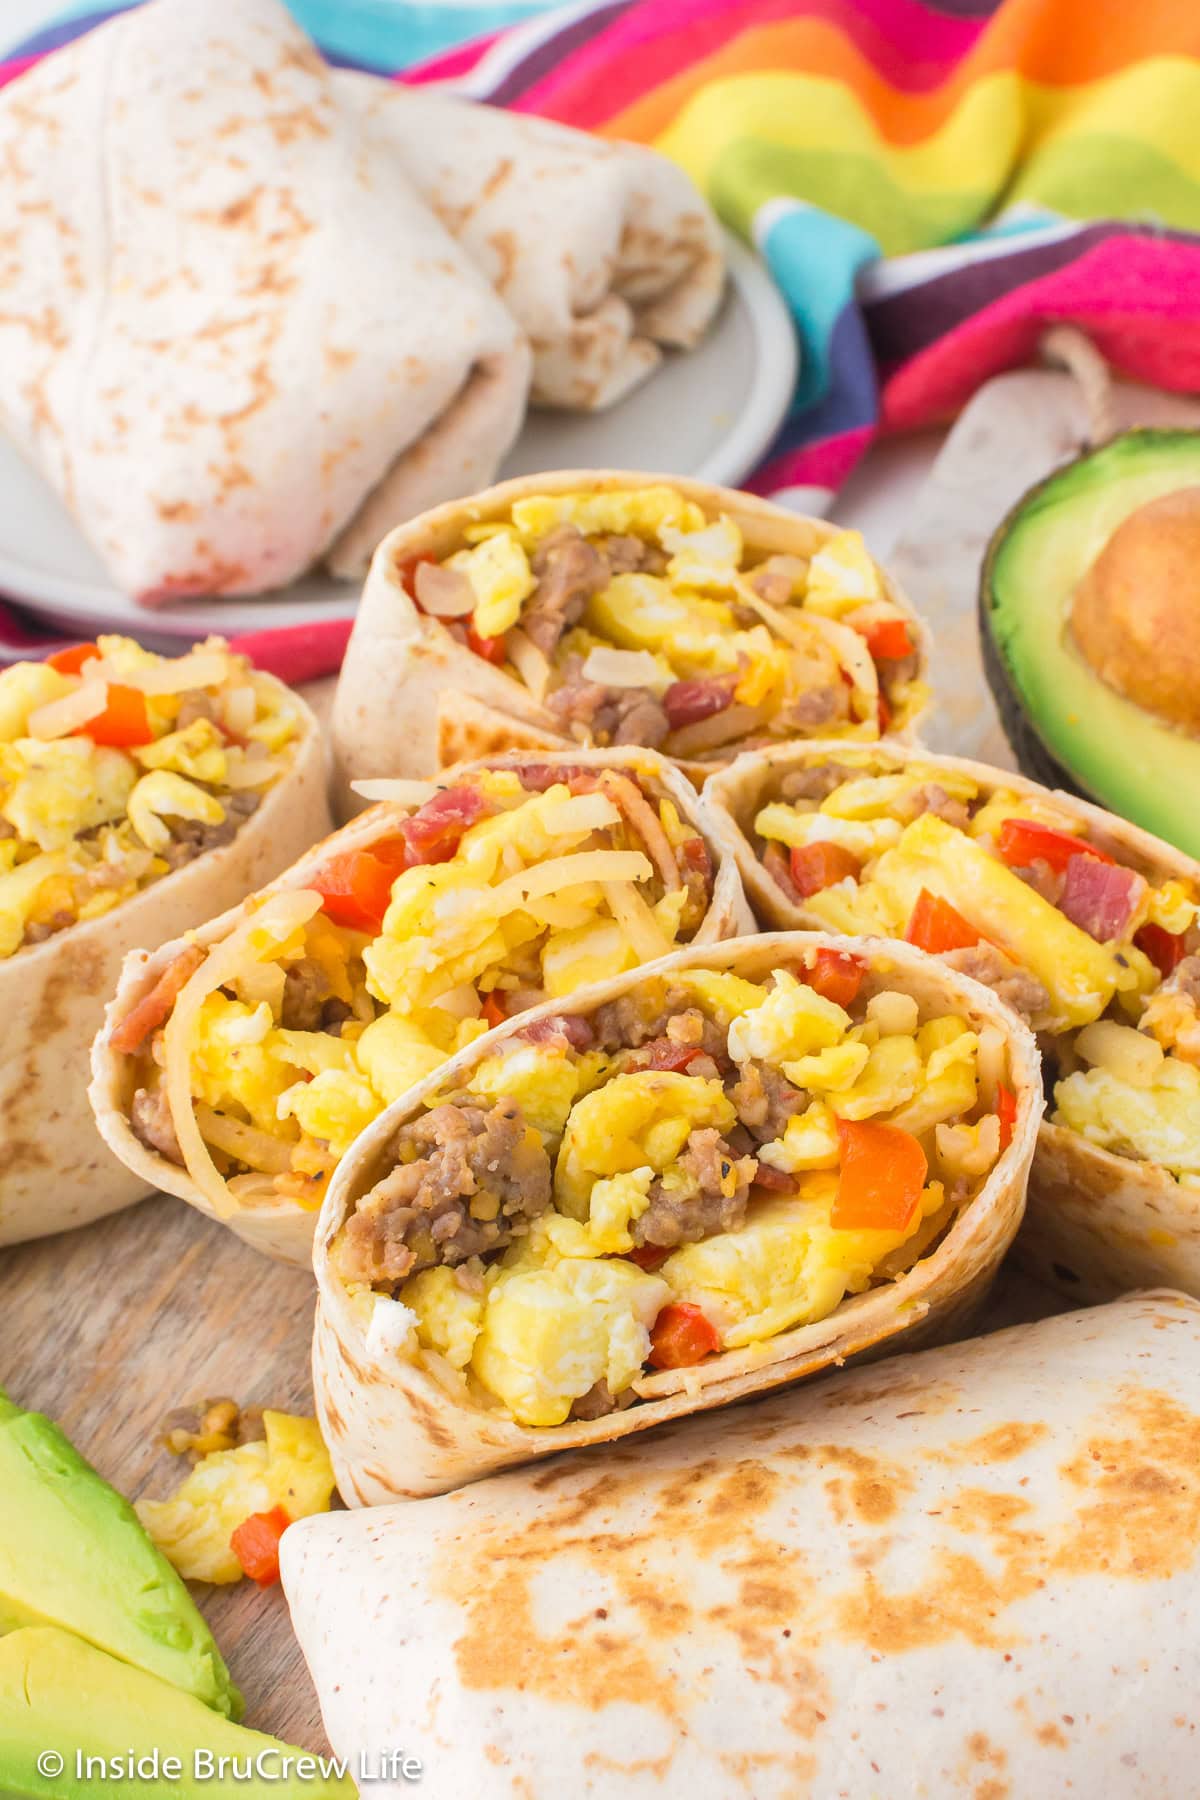 Egg burritos cut in half and on a tray.